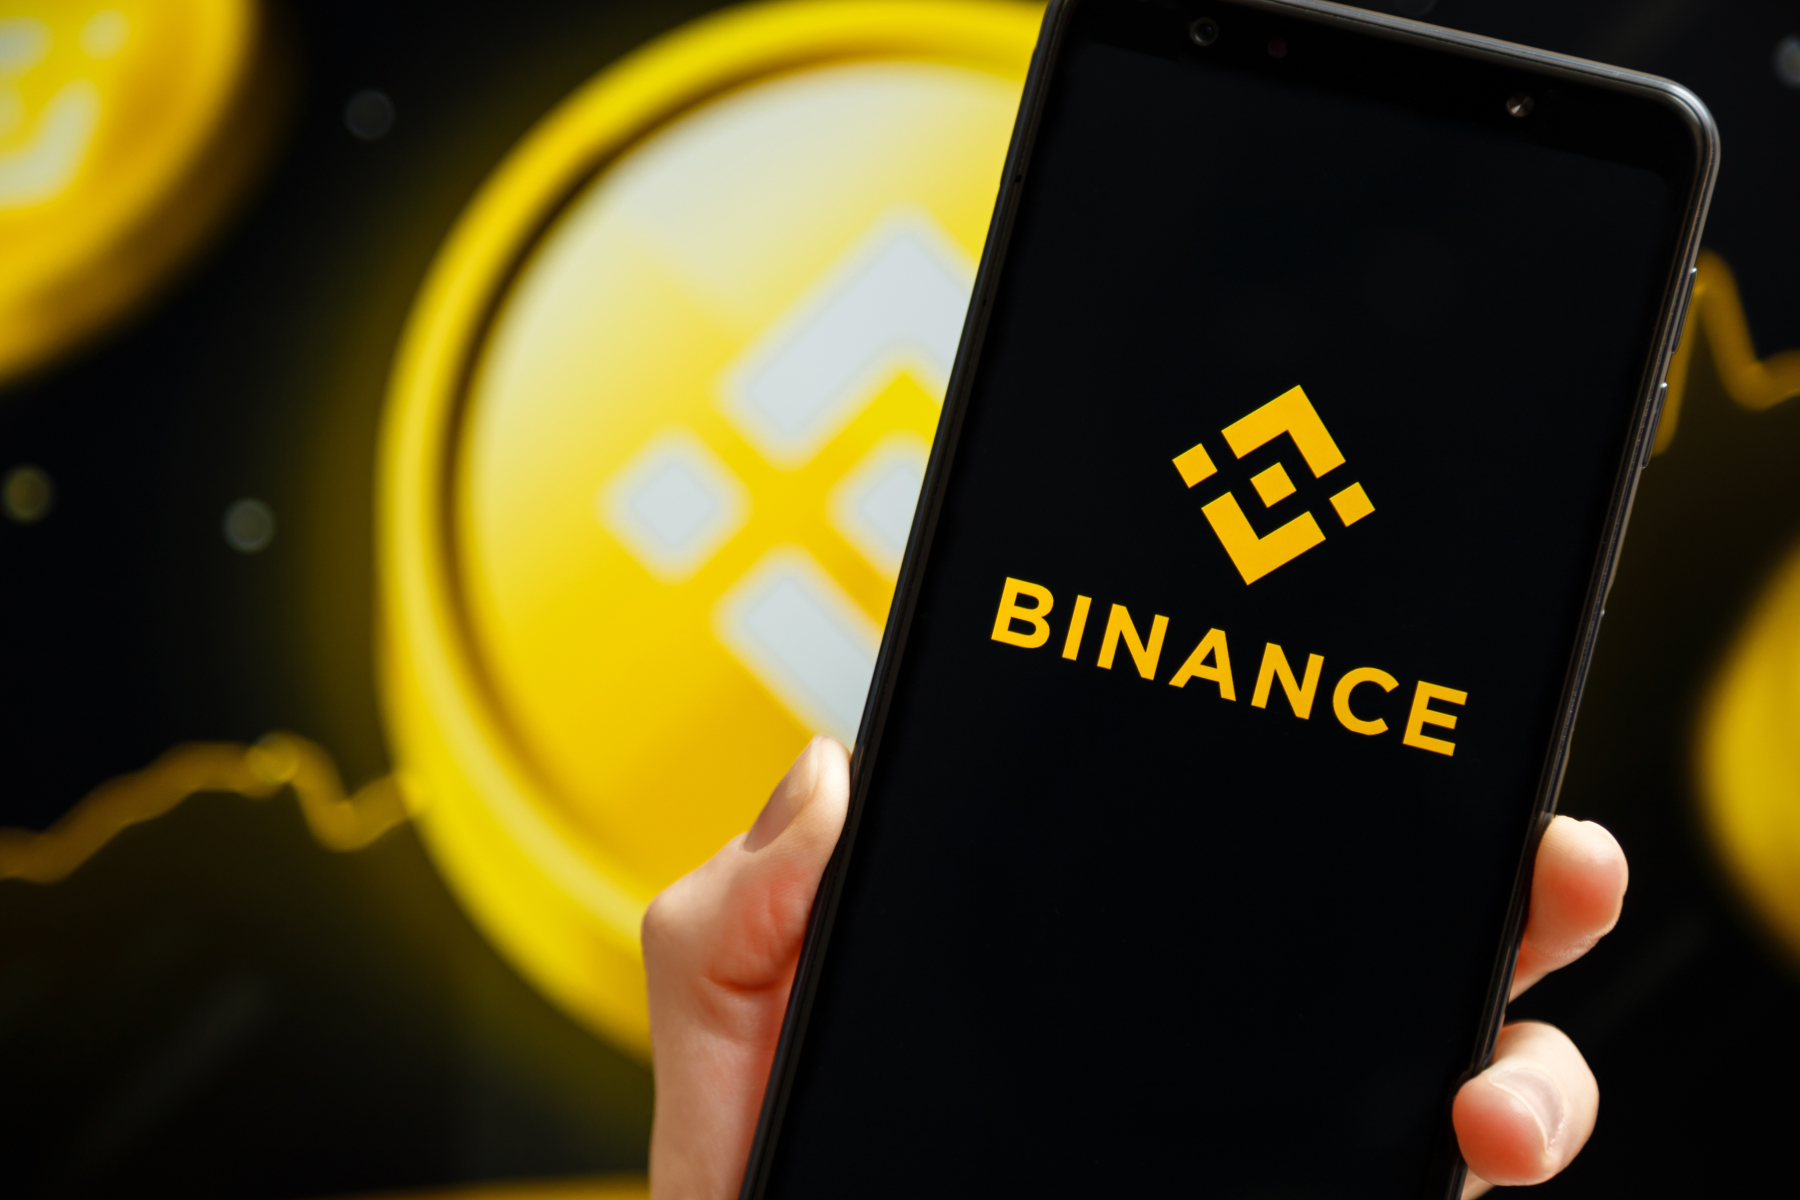 Binance does not accept the Genesis proposal due to a conflict of interest
